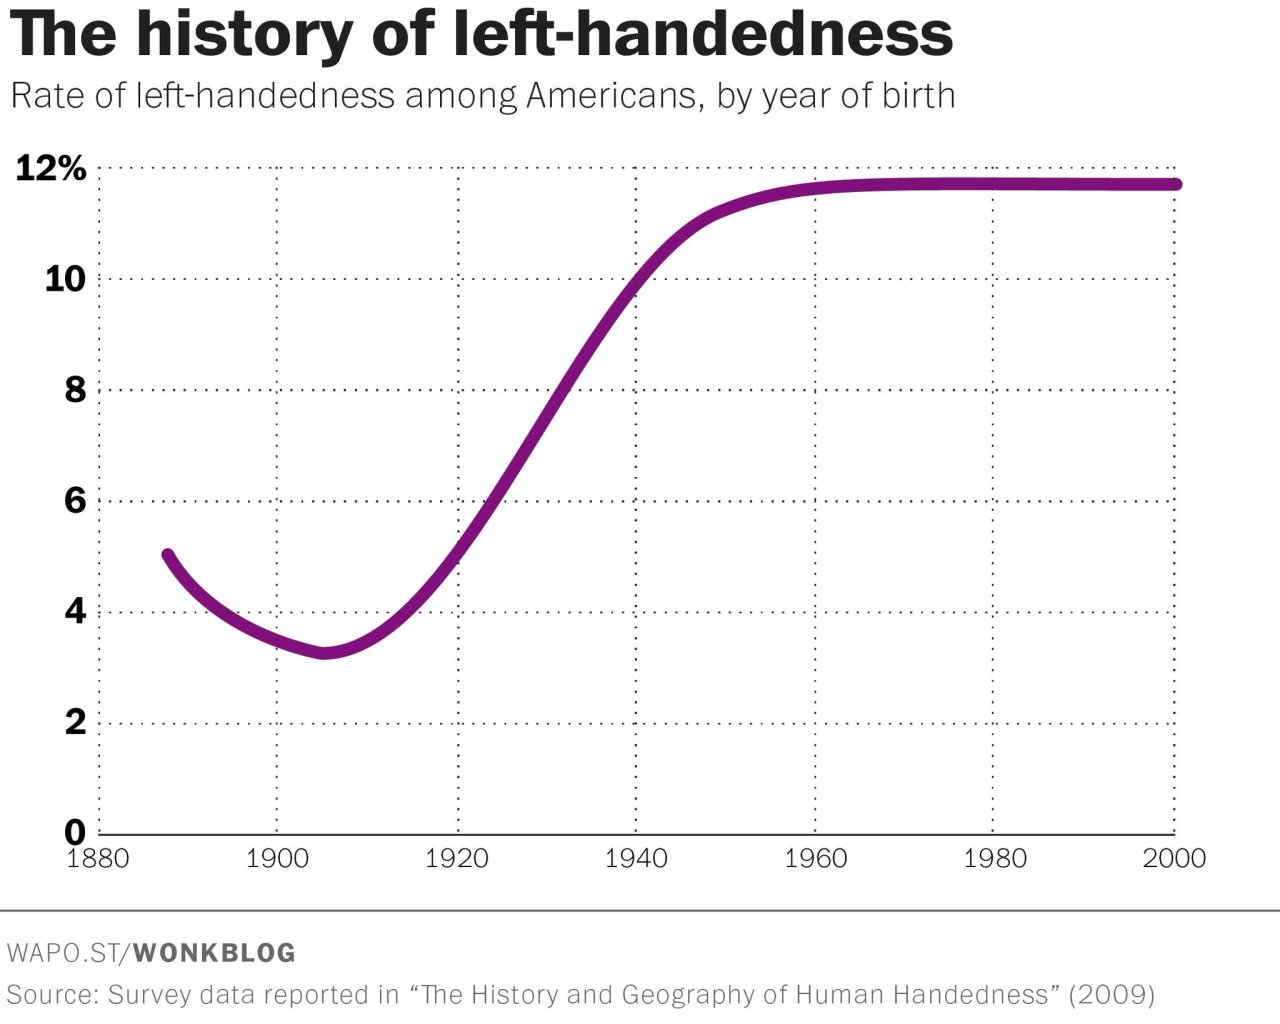 A graph labeled "The history of left-handedness; Rate of left-handedness among Americans, by year of birth". The line starts at about five percent in year 1880, declining to about three by 1910, and then steadily rising until it reaches about twelve in 1960 and stays around that percentage up to 2000.